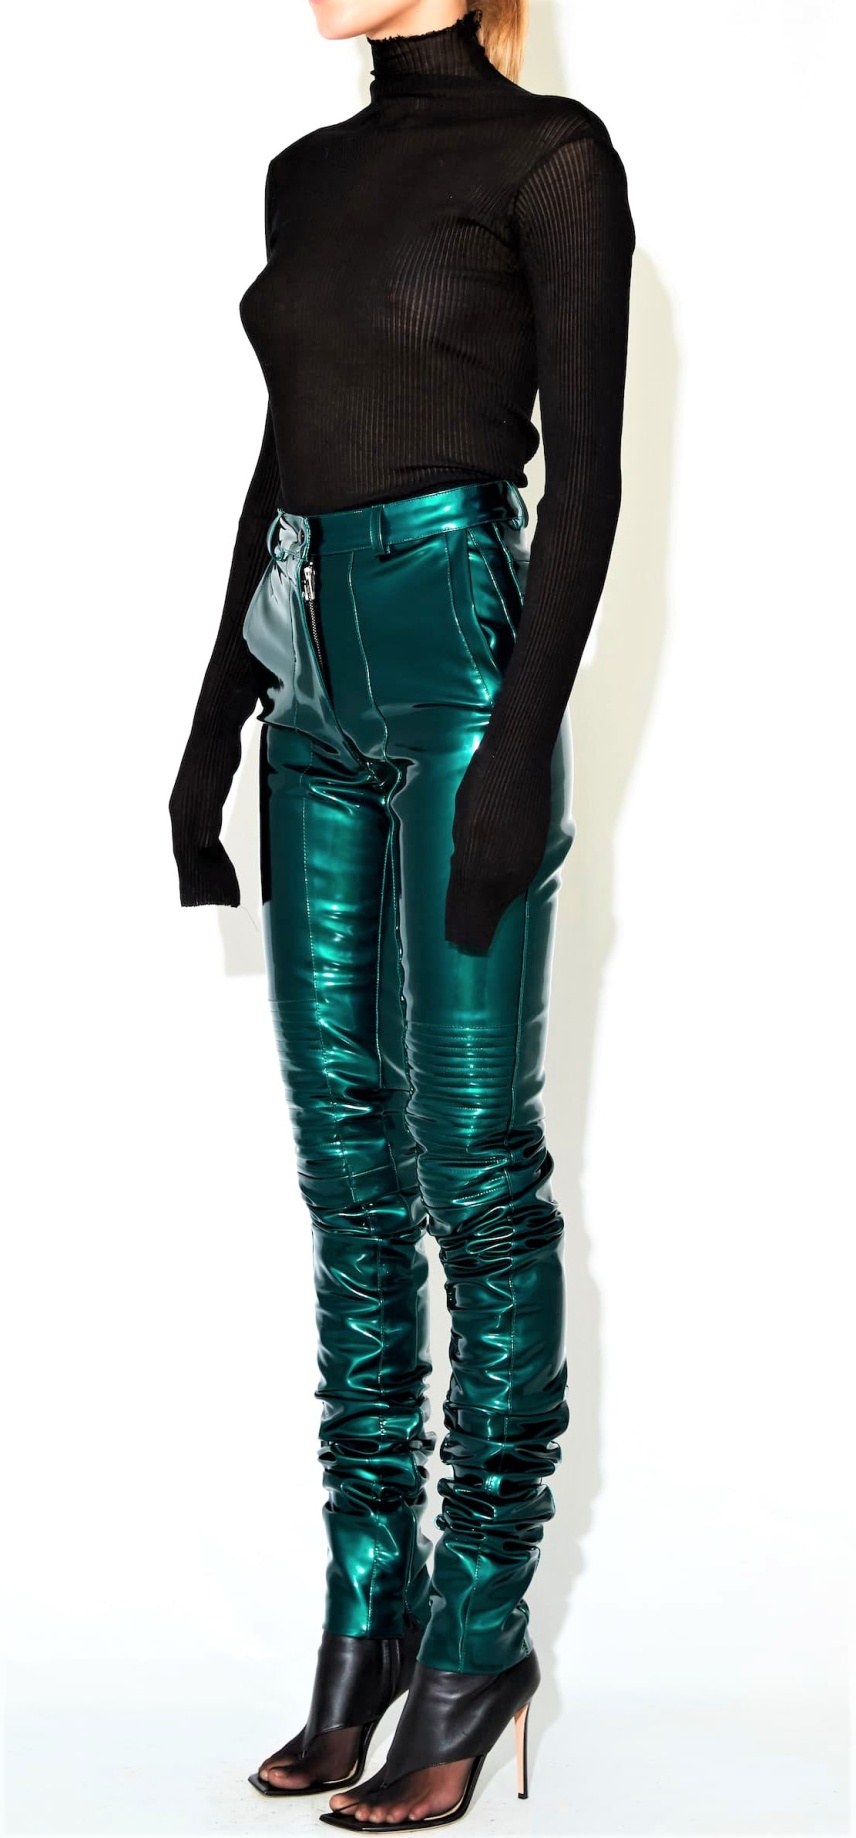 teal moto pants Laquan Smith blk histroy 2-21 cropped.jpg